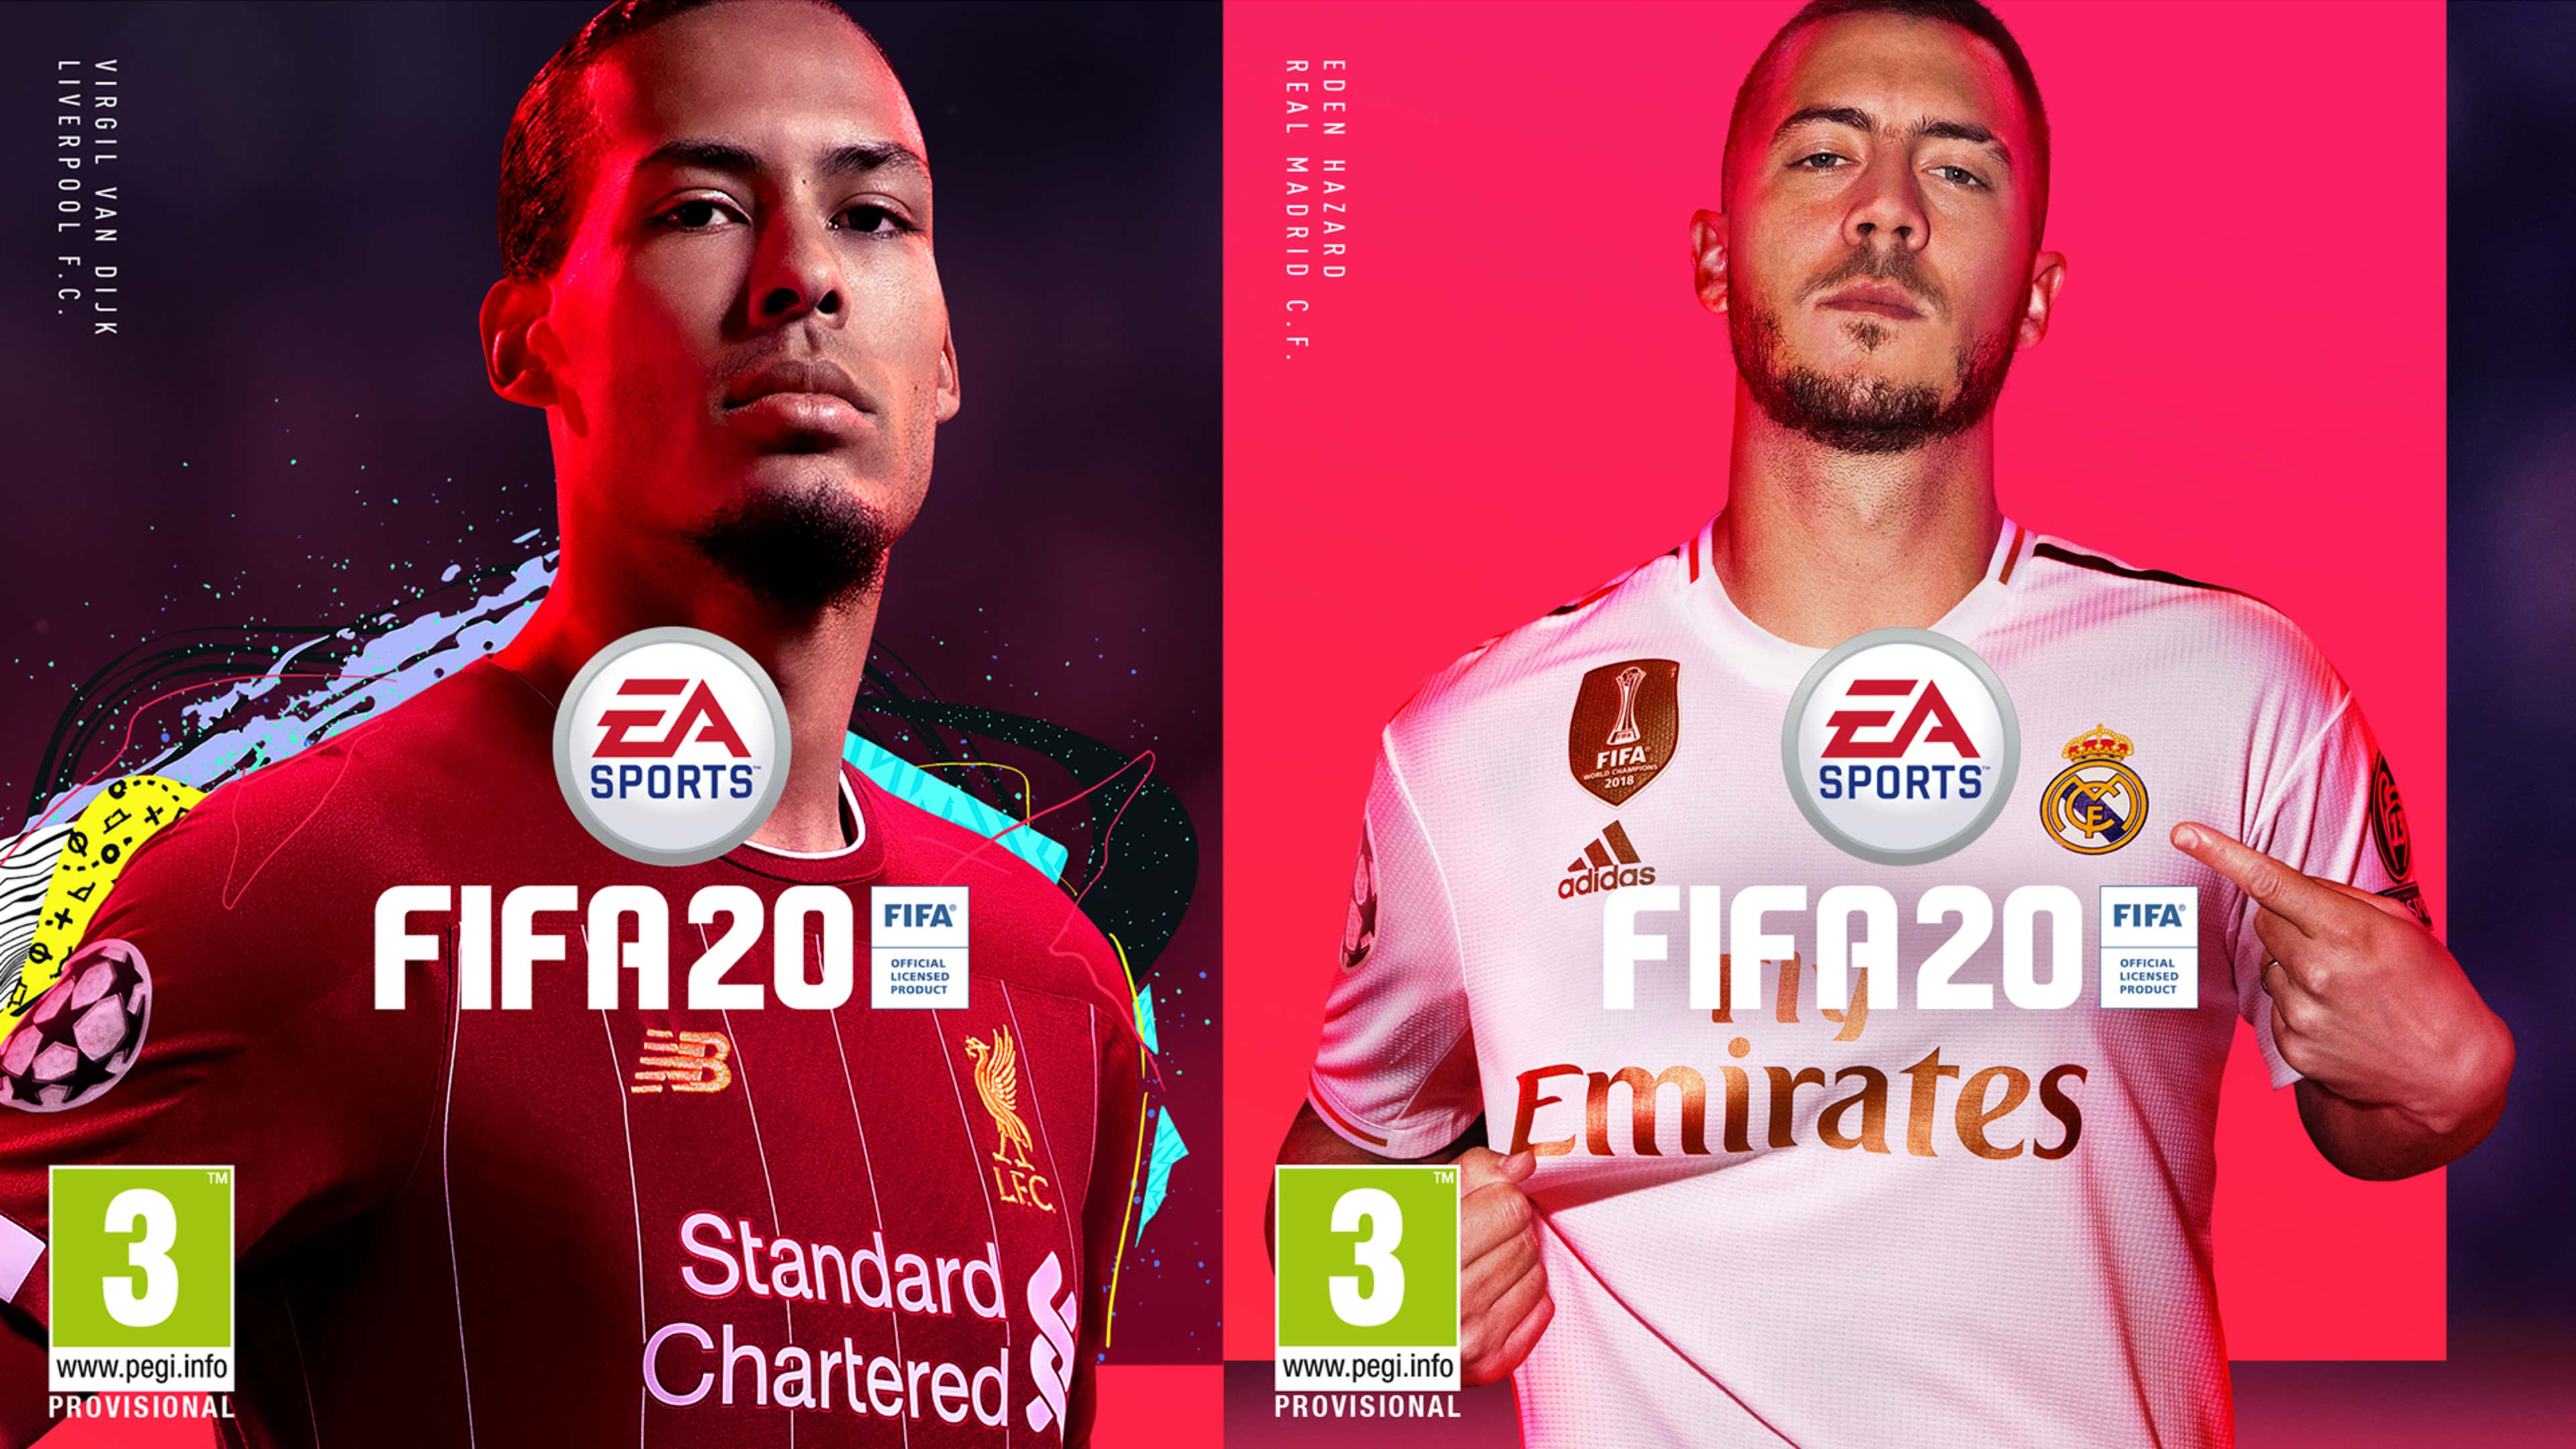 FIFA 18 Fueled by Cristiano Ronaldo, Coming September 29 to Xbox One - Xbox  Wire